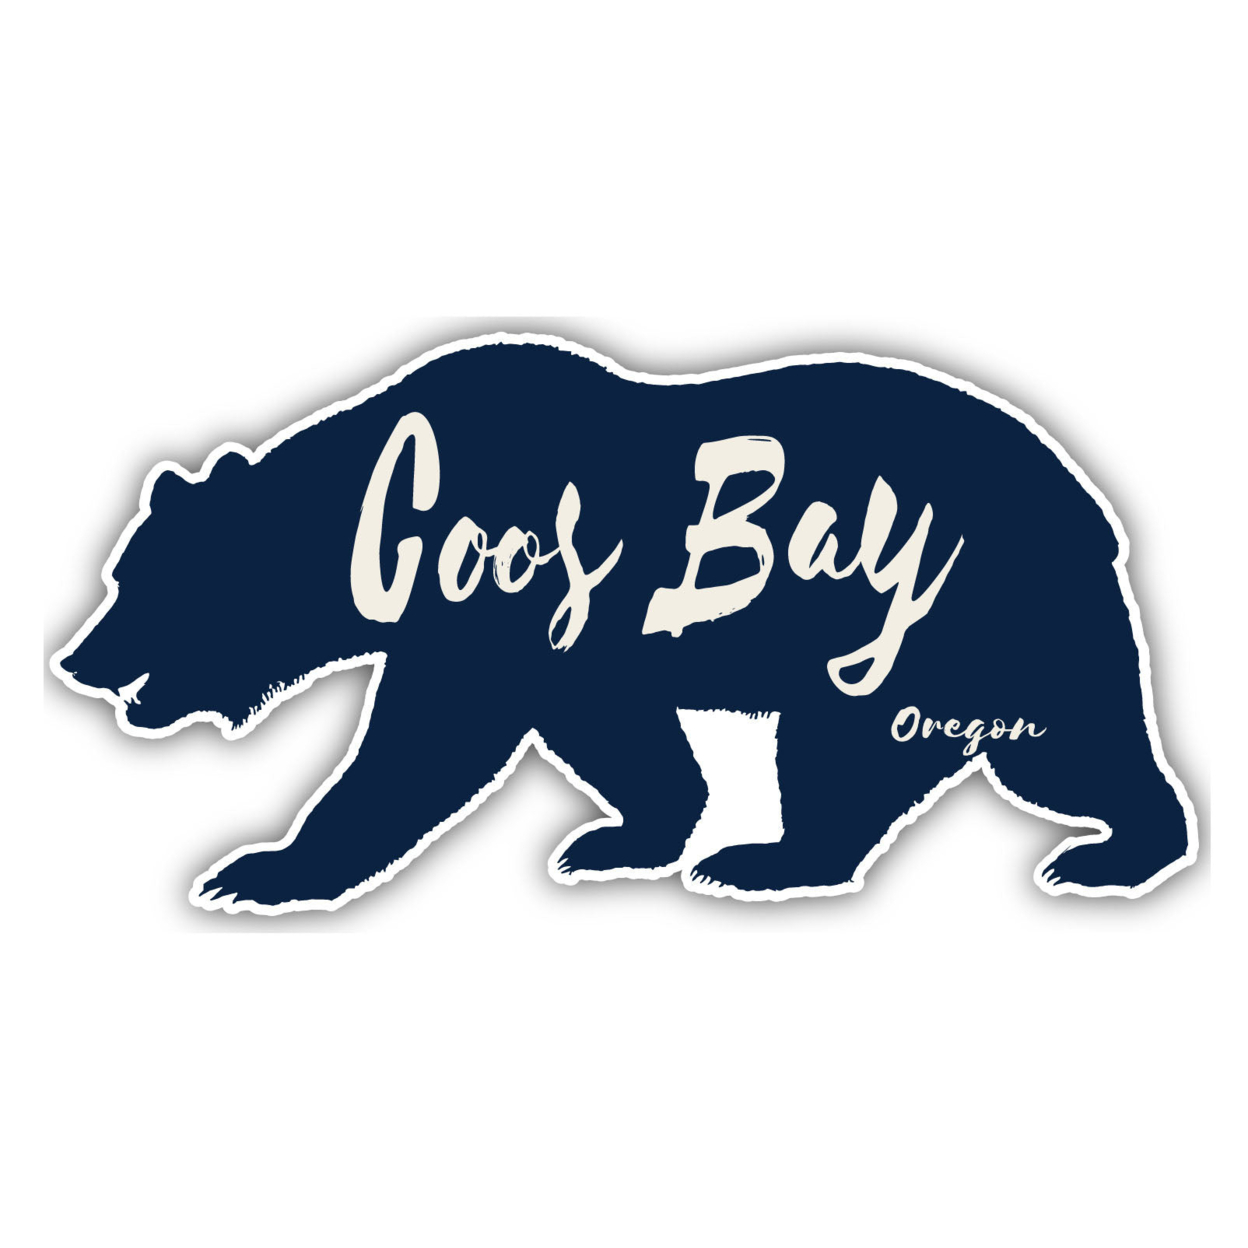 Coos Bay Oregon Souvenir Decorative Stickers (Choose Theme And Size) - 4-Pack, 6-Inch, Adventures Awaits